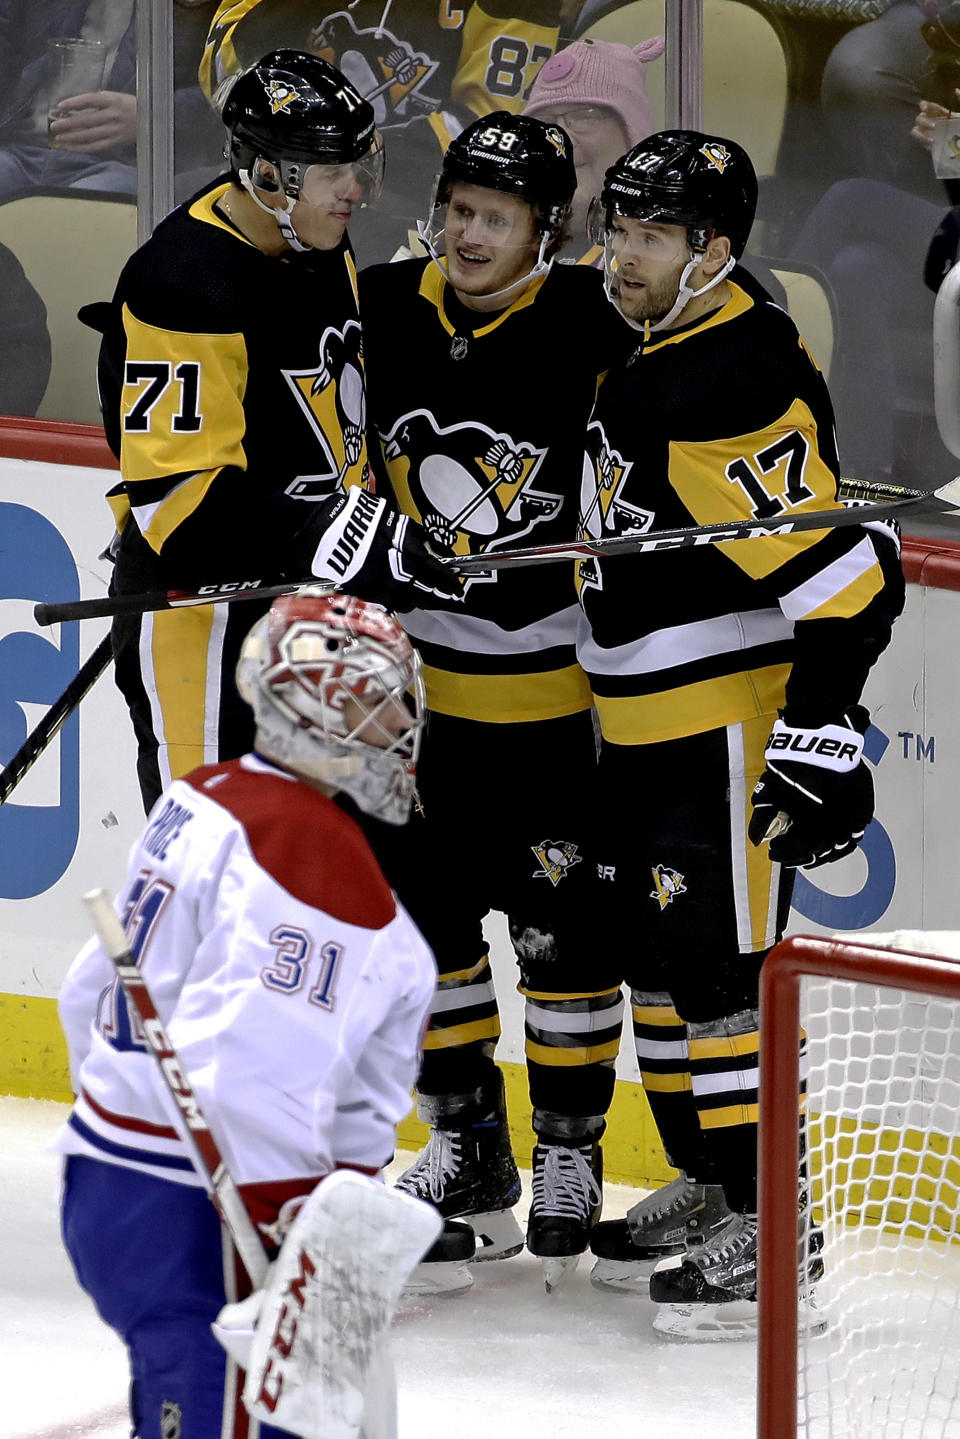 Pittsburgh Penguins' Jake Guentzel (59) celebrates his goal with Evgeni Malkin (71) and Bryan Rust (17) as Montreal Canadiens goaltender Carey Price (31) collects himself during the first period of an NHL hockey game in Pittsburgh, Tuesday, Dec. 10, 2019. (AP Photo/Gene J. Puskar)